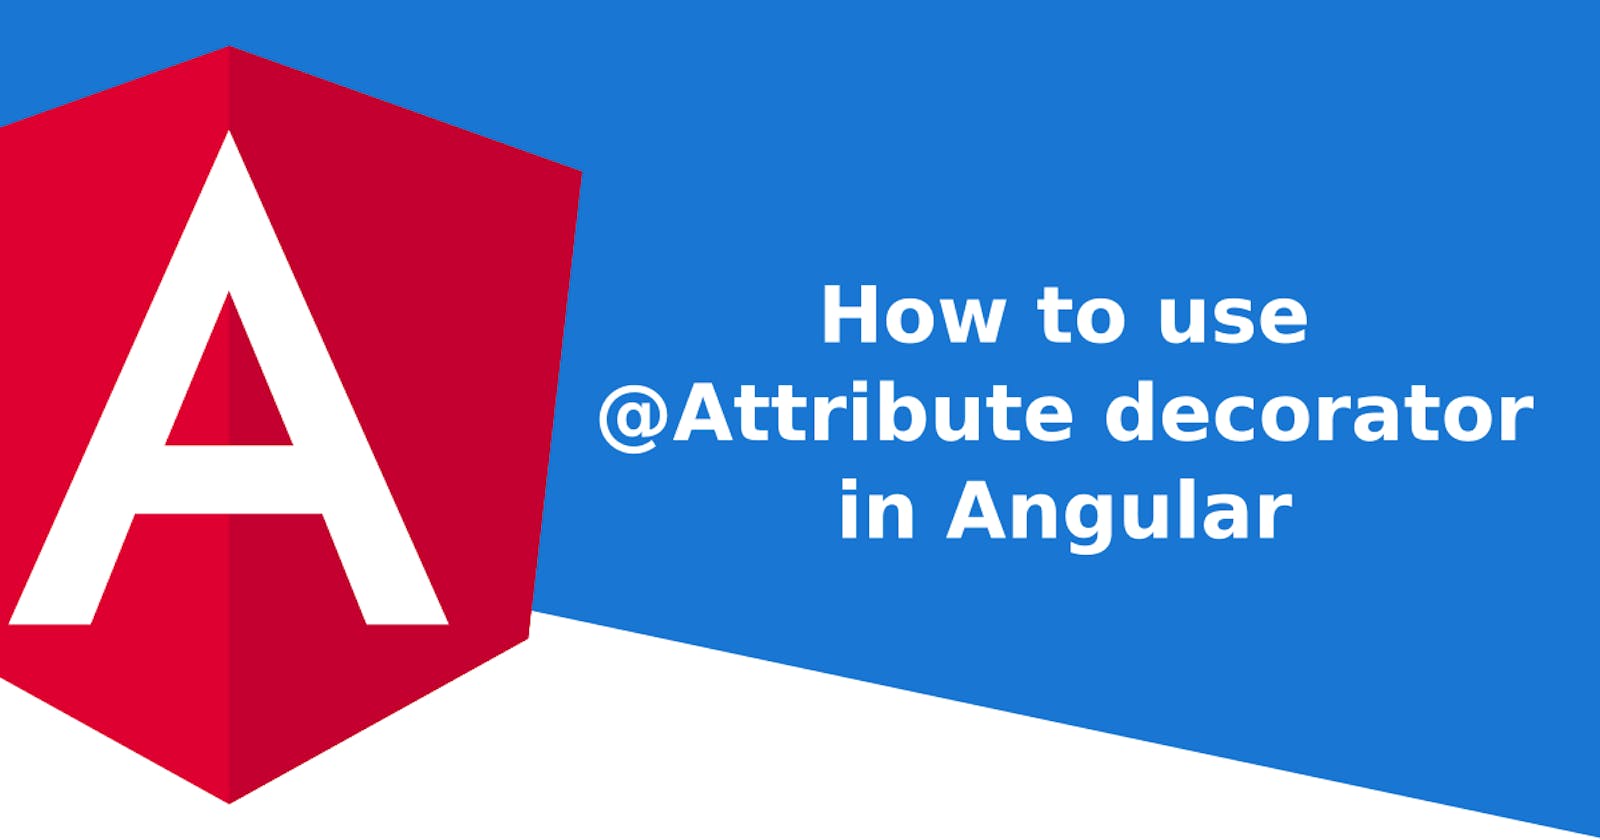 How to use @Attribute decorator in Angular